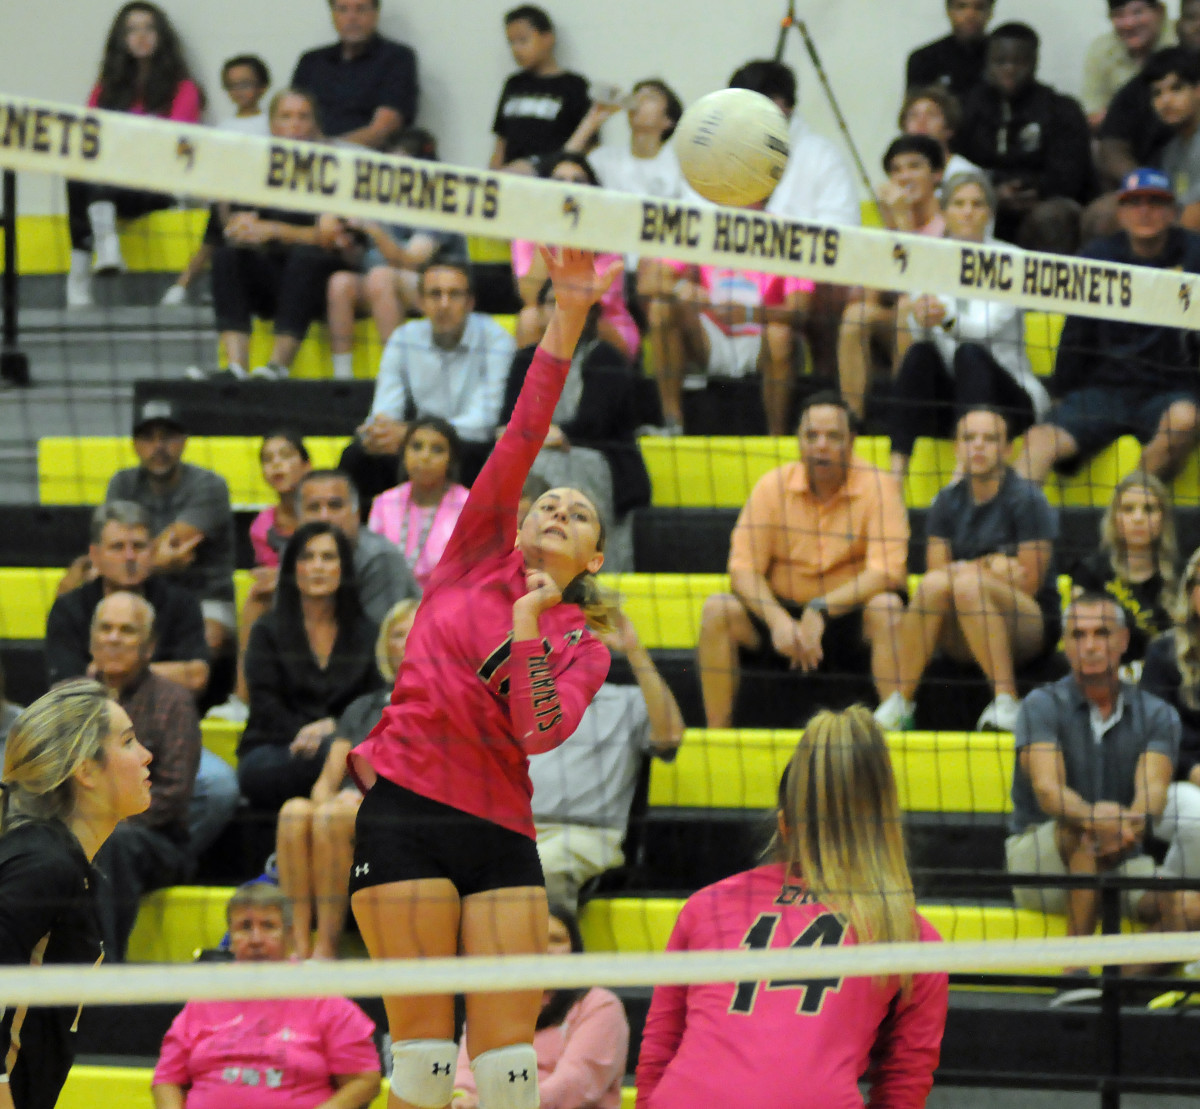 Bishop Moore junior Emily Schellenberg goes for one of her match-high 15 kills against Lake Placid. Schellenberg also had 12 digs in the 25-5, 25-12, 25-6 victory in the Region 2-4A quarterfinals.